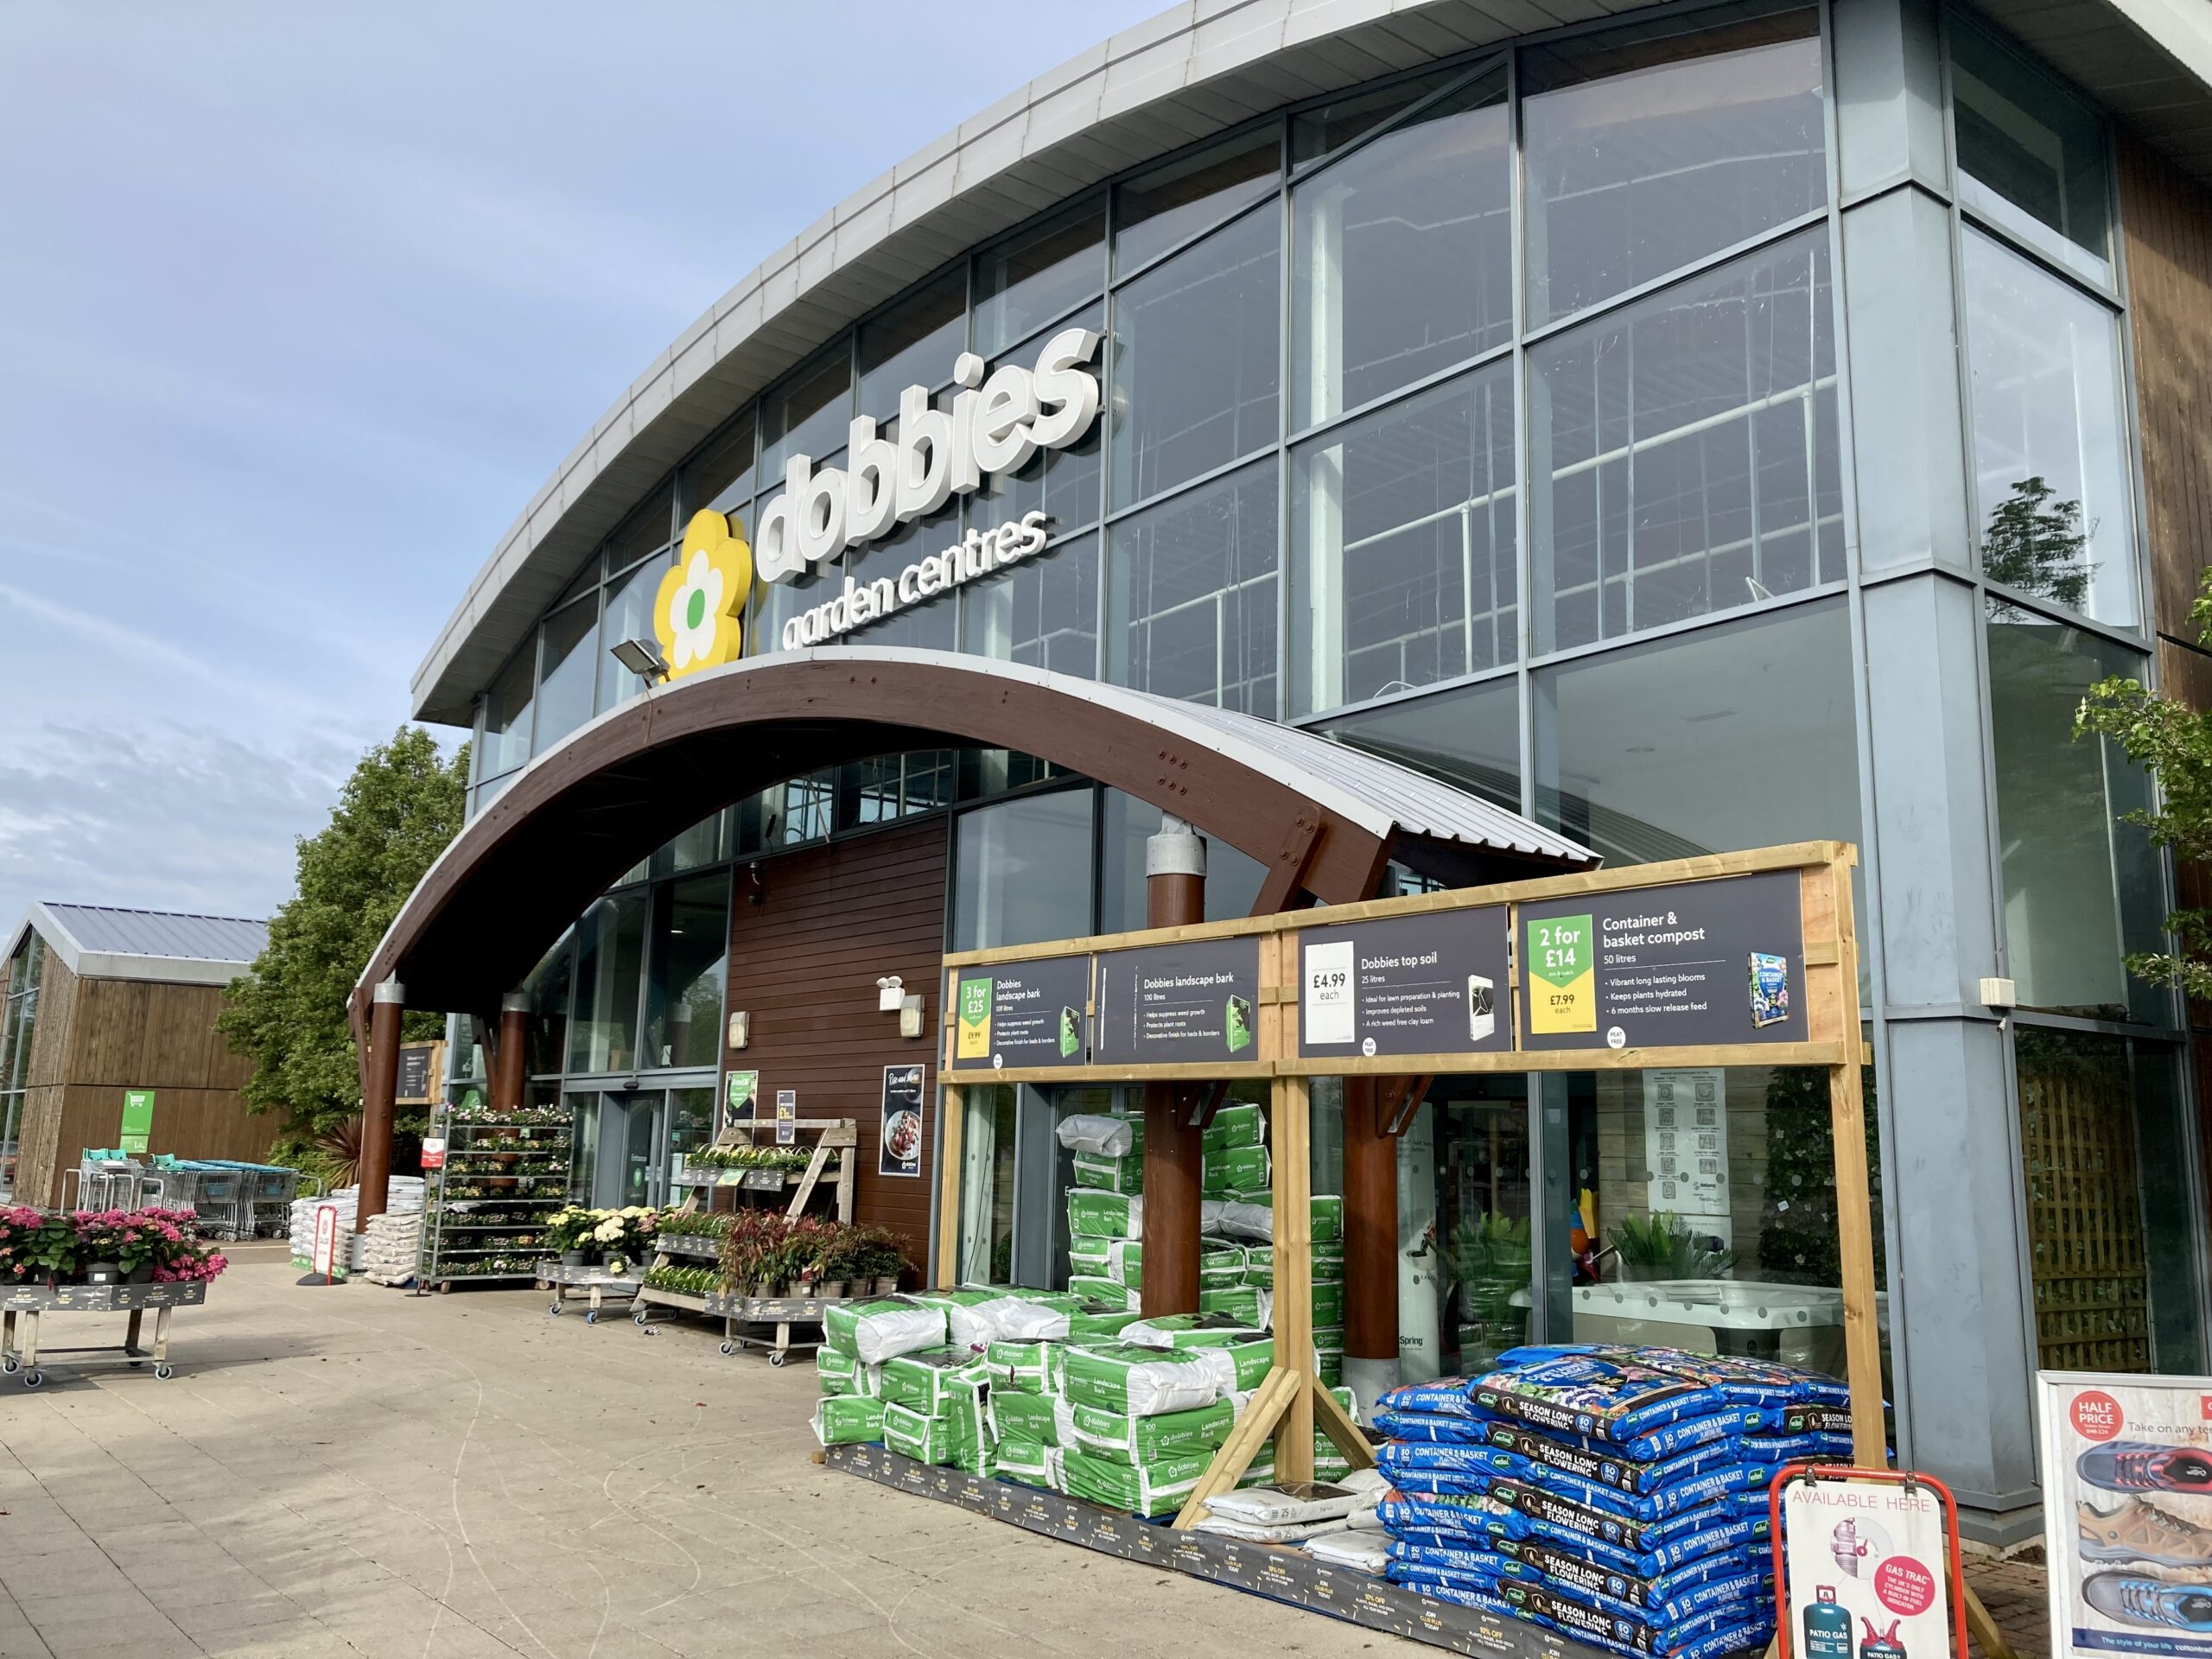 Dobbies garden centre in Southport. Photo by Andrew Brown Stand Up For Siouthport